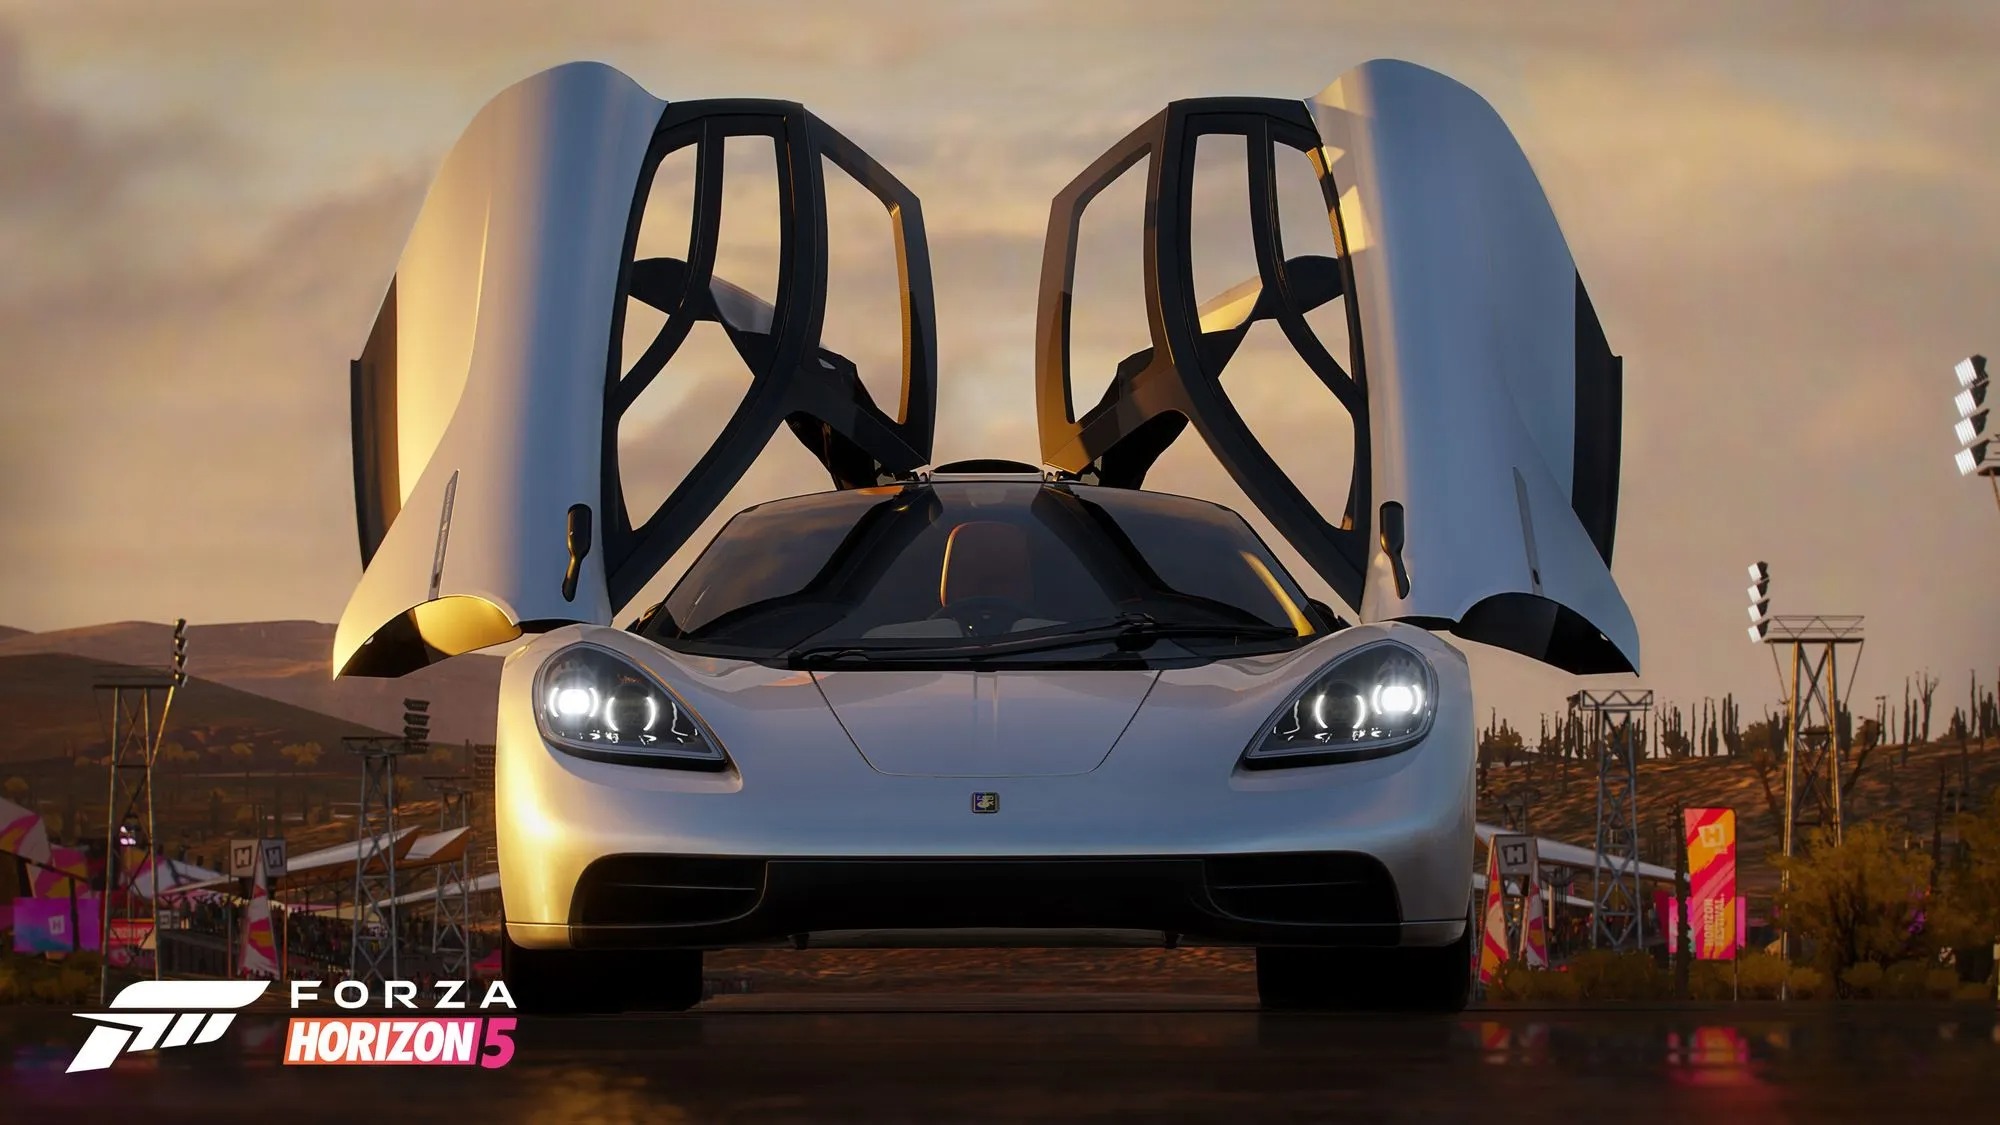 Forza Horizon 5's map is 50% bigger than the last game